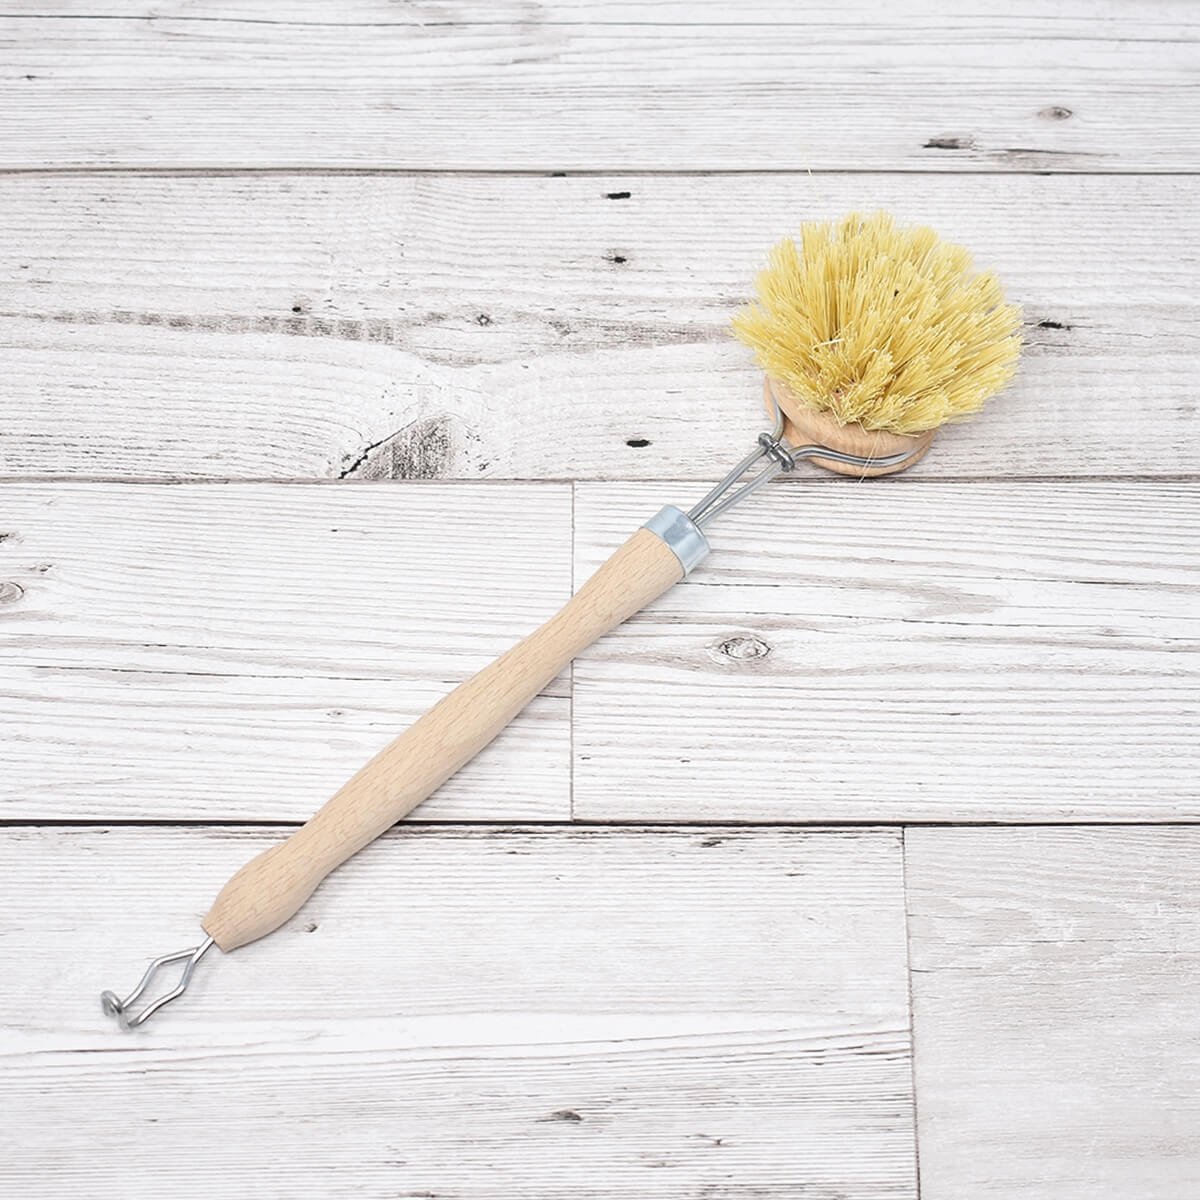 https://www.peacewiththewild.co.uk/wp-content/uploads/2019/08/natural-bristle-dish-brush-eco-living-0.jpg